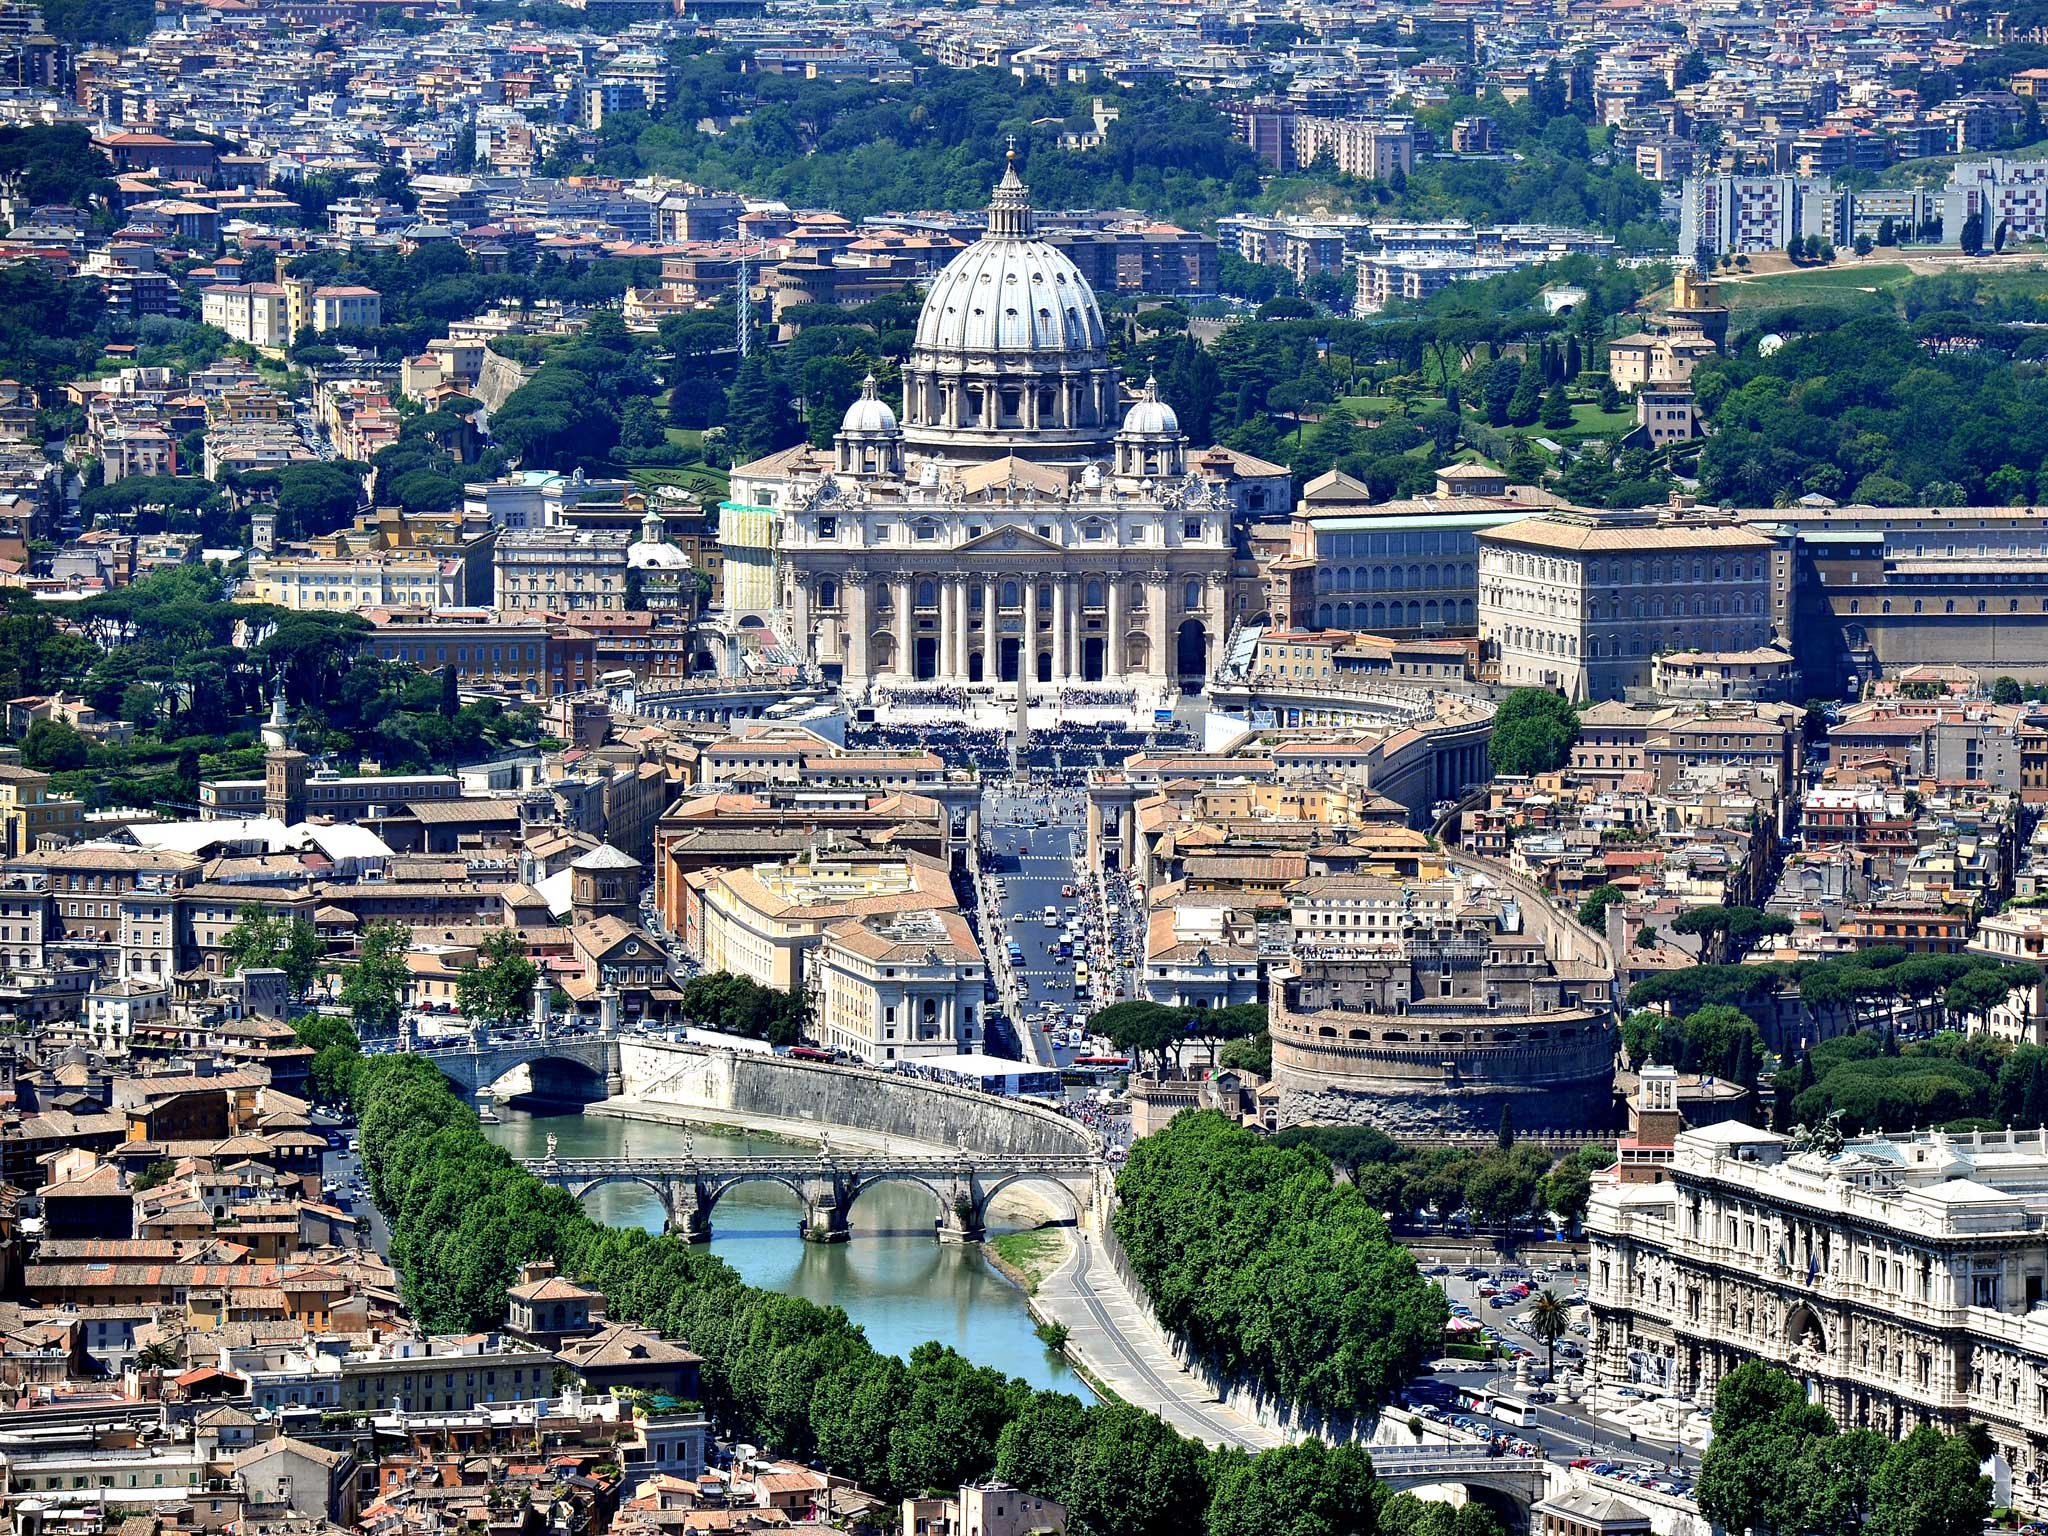 Traffic pollution has become a major problem for Rome’s historic sites